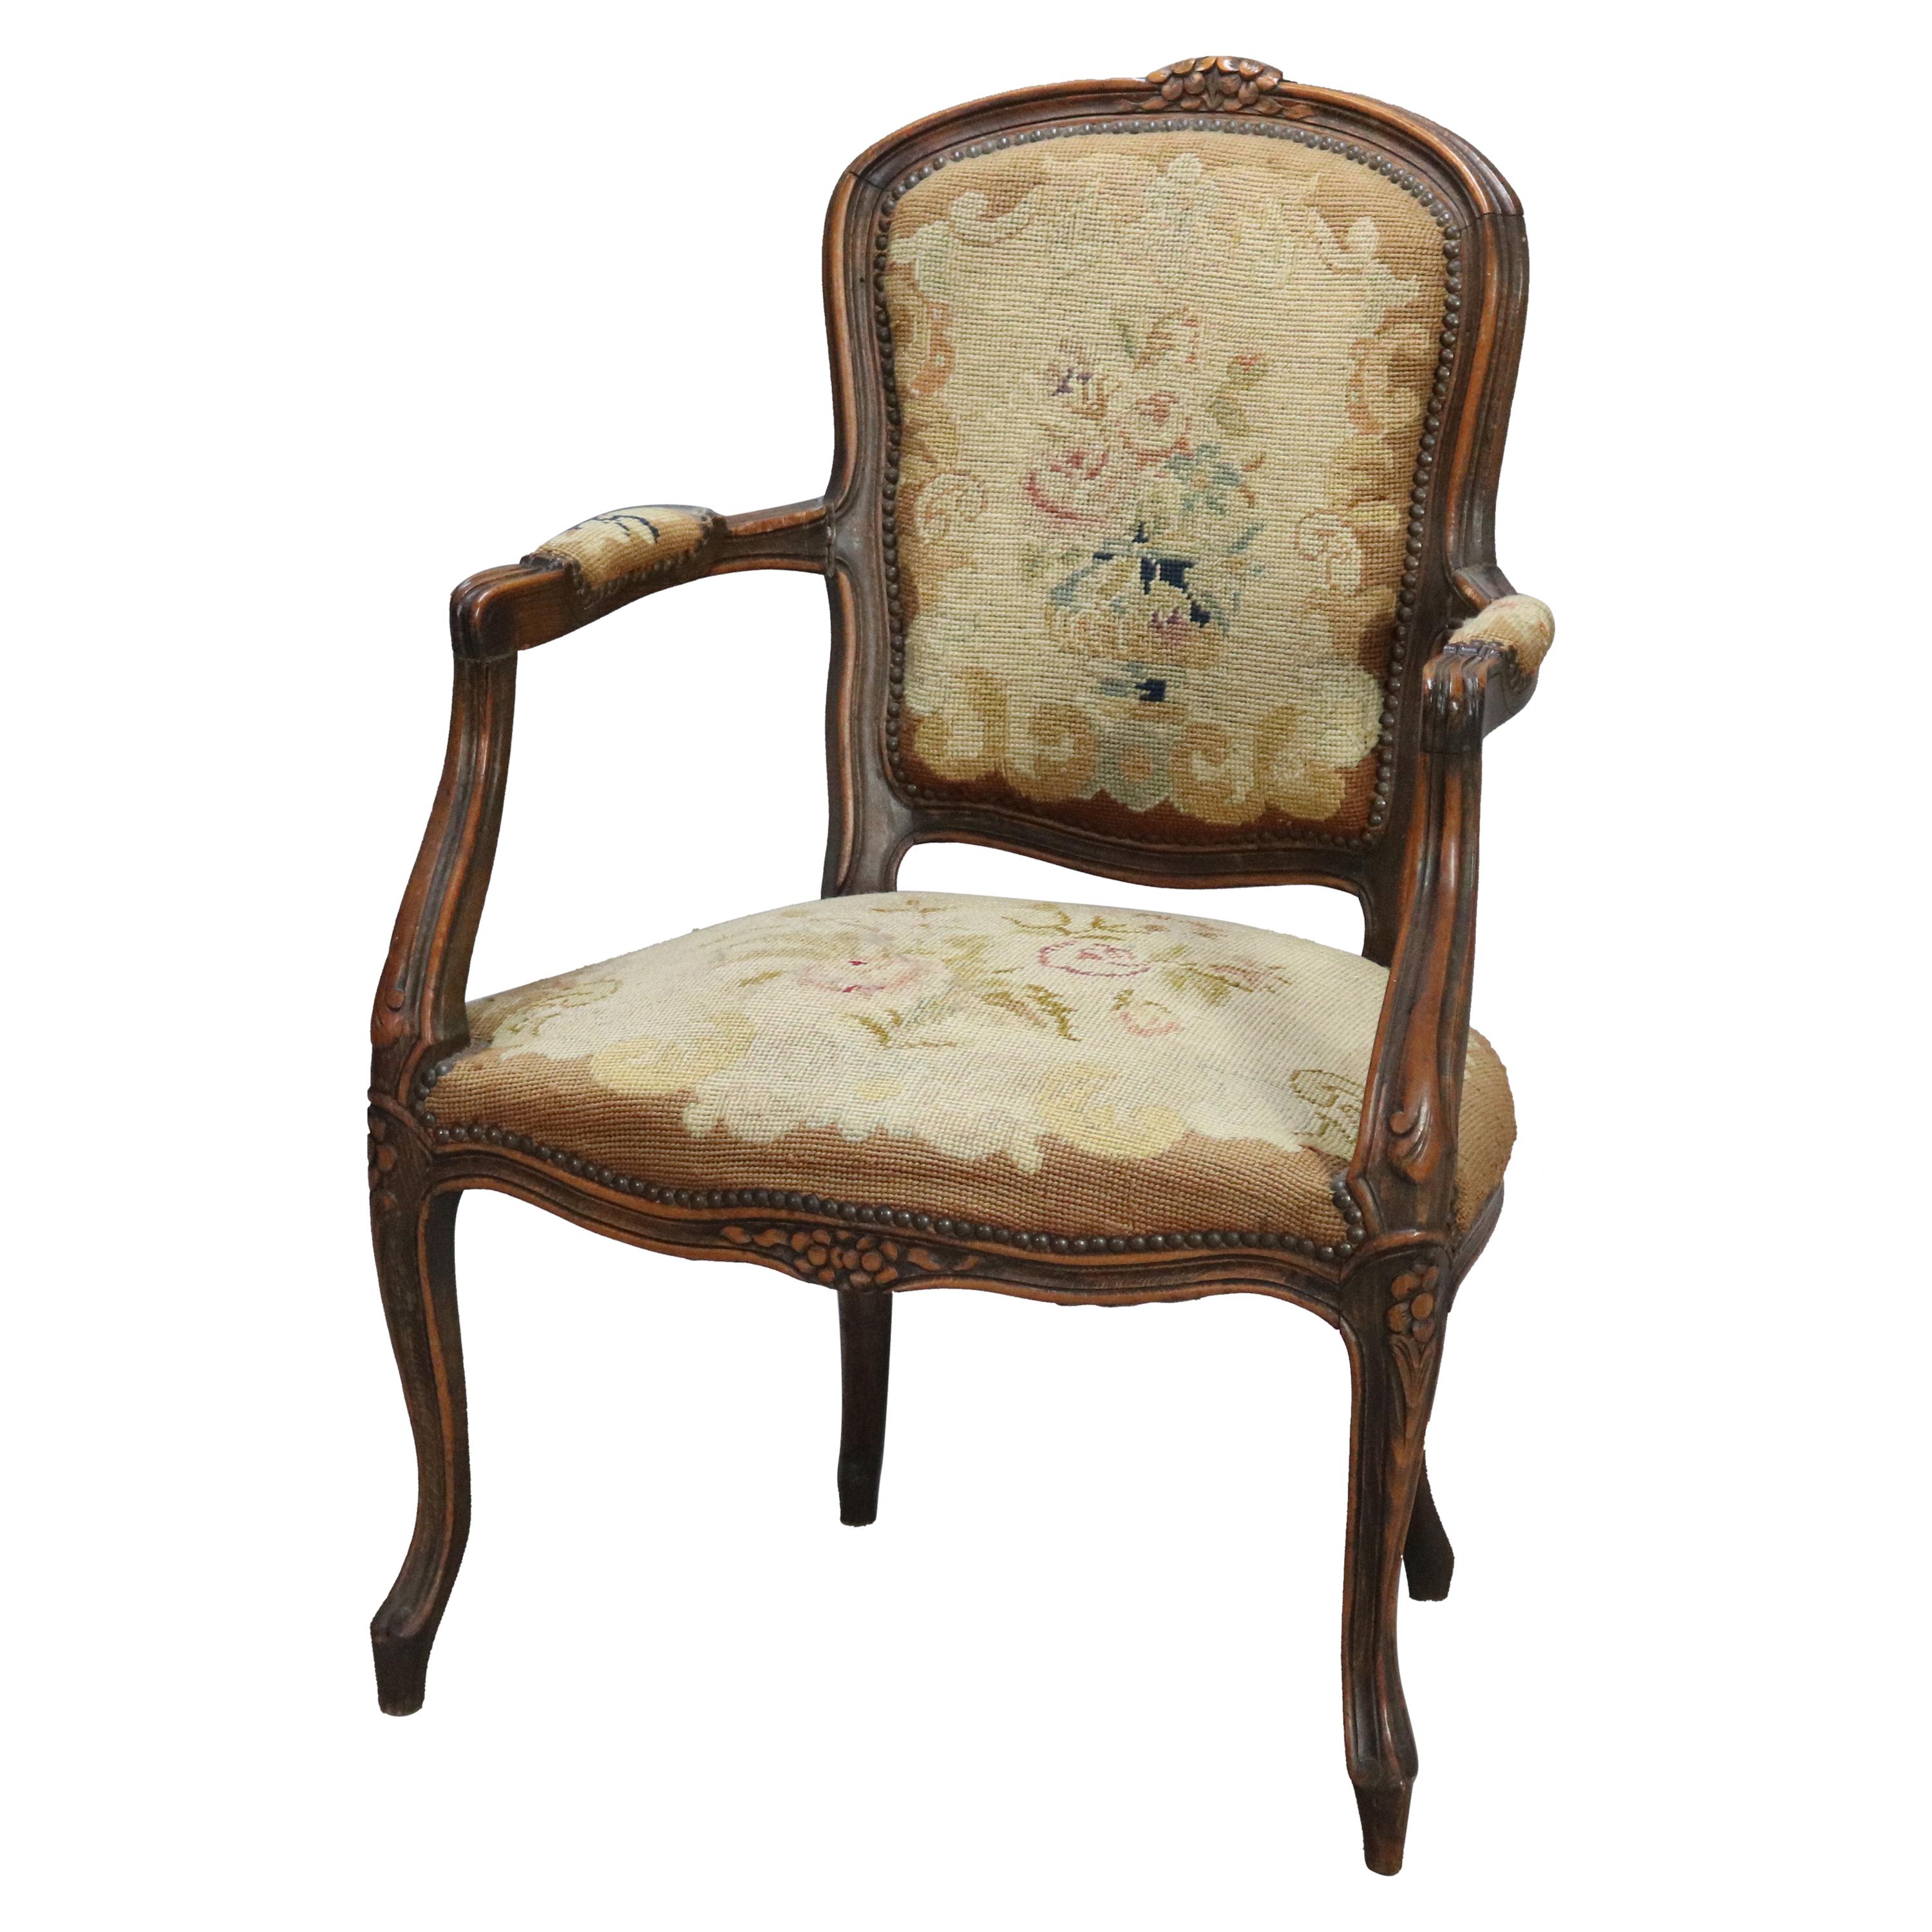 Antique French Louis XVI Fruitwood and Needlepoint Fauteuil Armchair, circa 1890